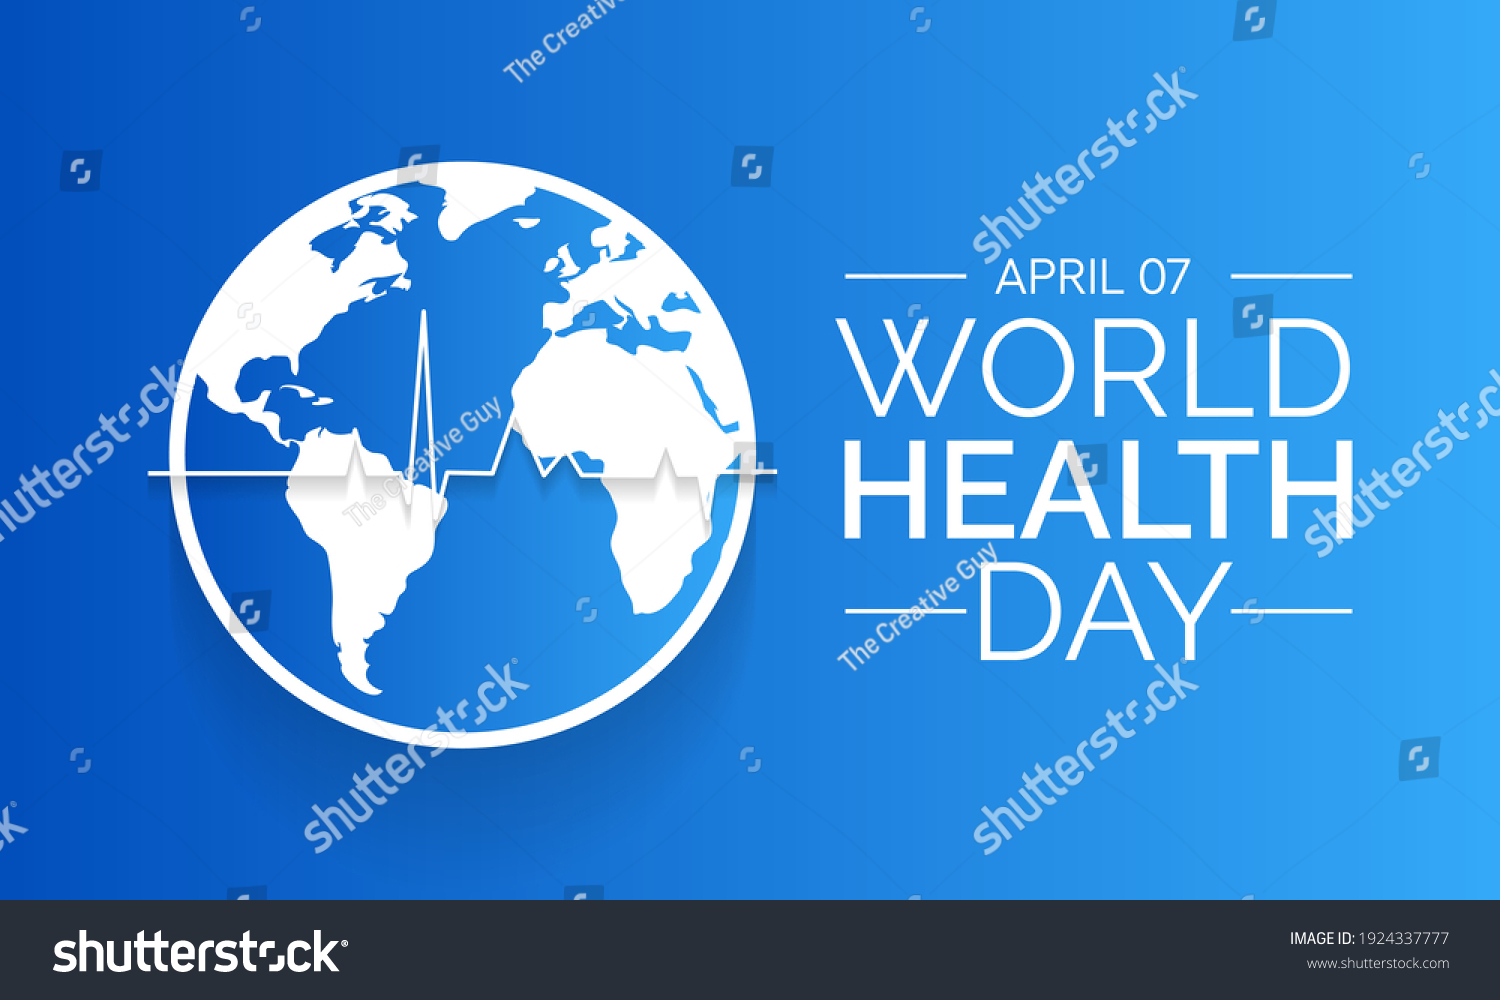 World Health Day is a global health awareness day celebrated every year on 7th April. Vector illustration design #1924337777